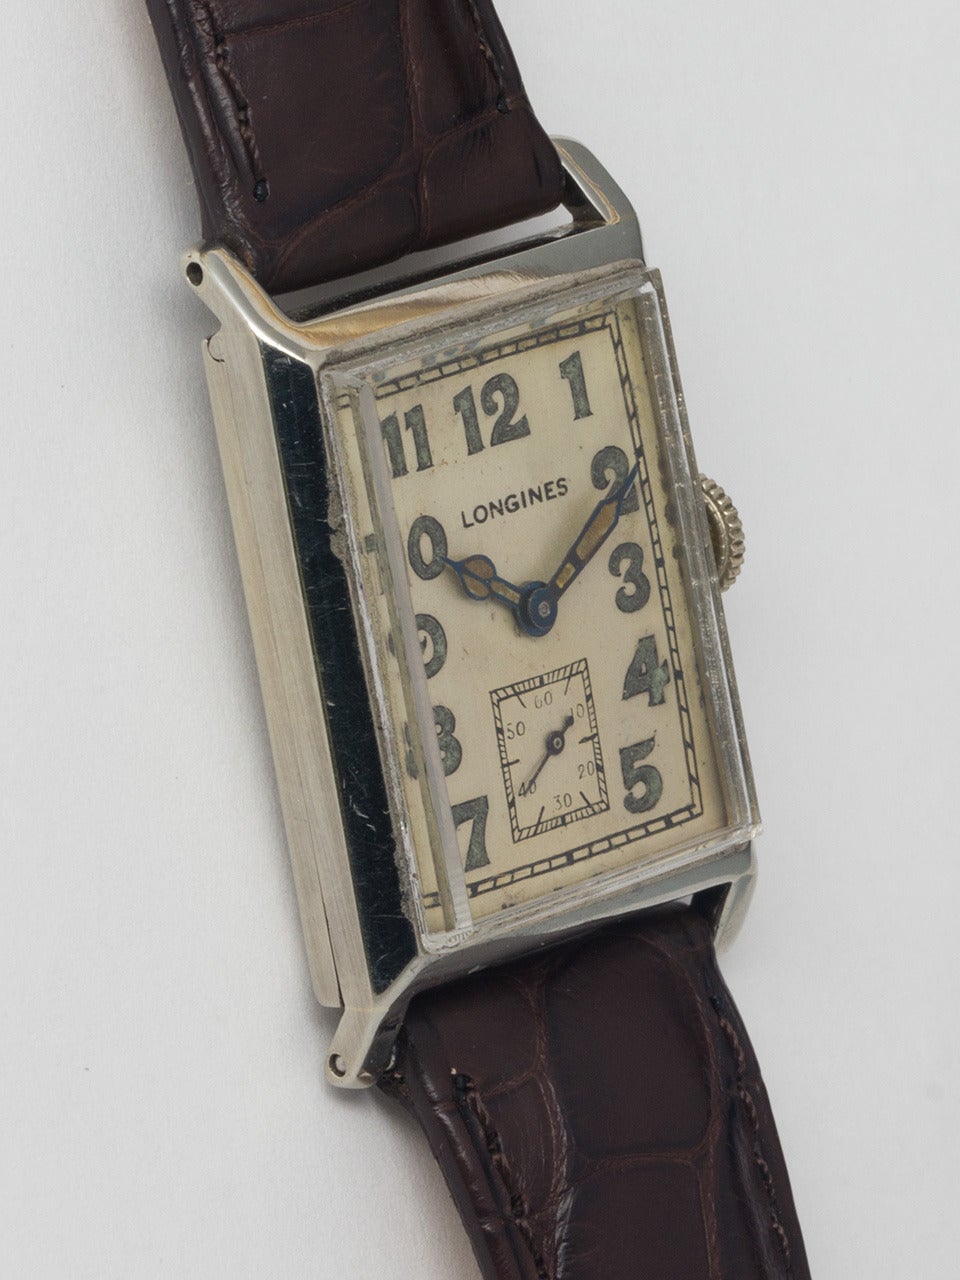 Longines 18K White Gold Rectangular Wristwatch, circa 1930. Hinged case measuring 24 X 36mm. Original matte silvered dial with luminous Arabic indexes and hands. Longines 10.86N 15-jewel manual-wind movement. Early large classic rectangular